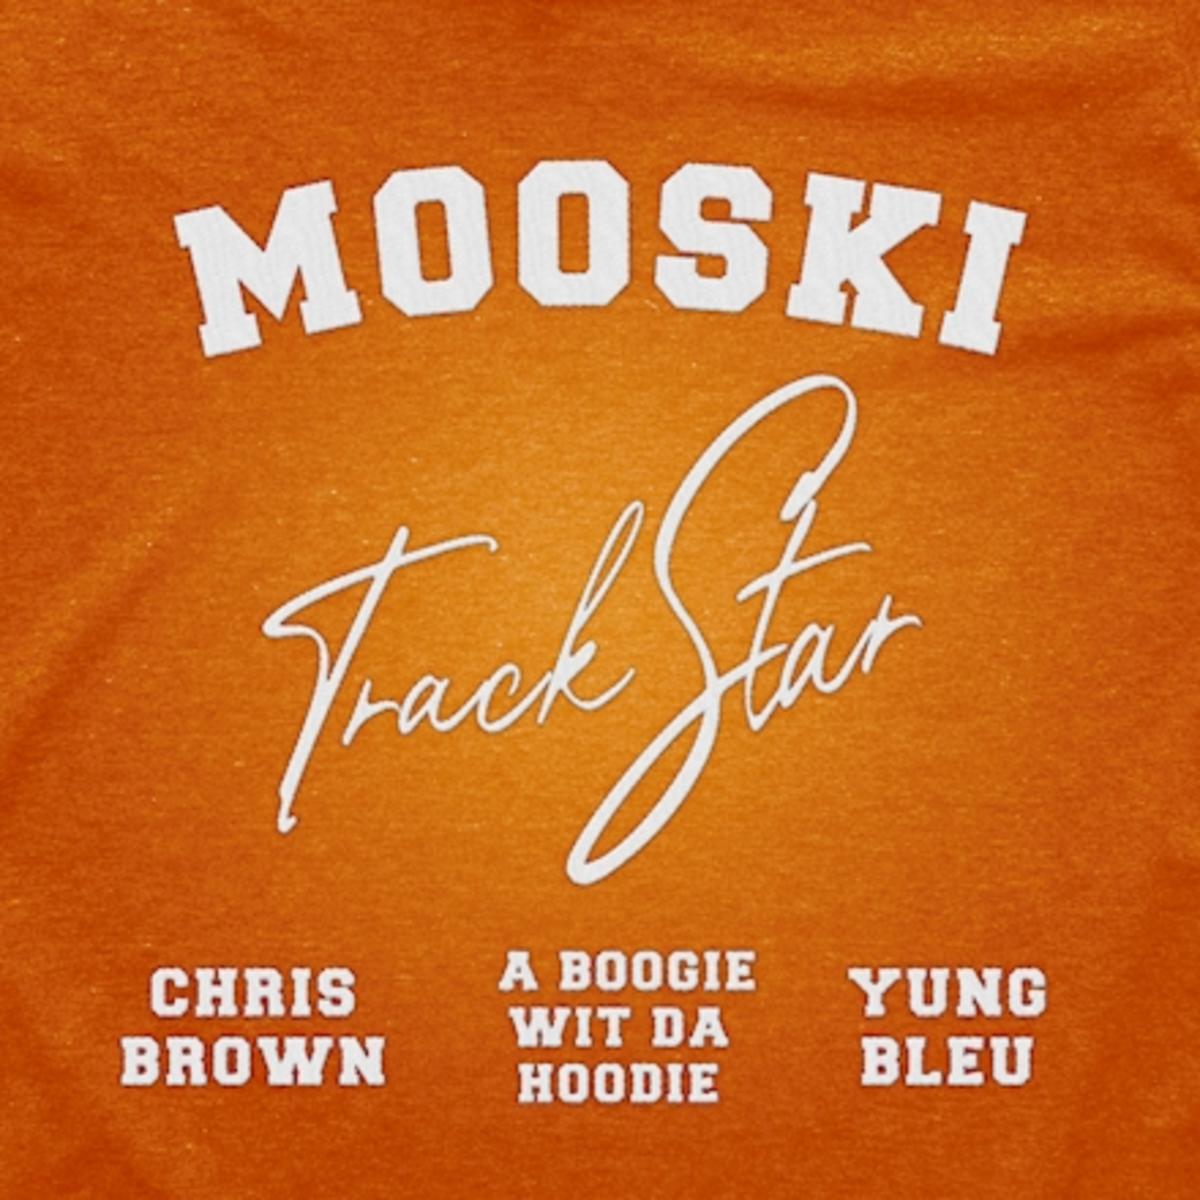 Mooski Recruits Chris Brown, A Boogie Wit Da Hoodie & Yung Bleu For The Official Remix To “Track Star”